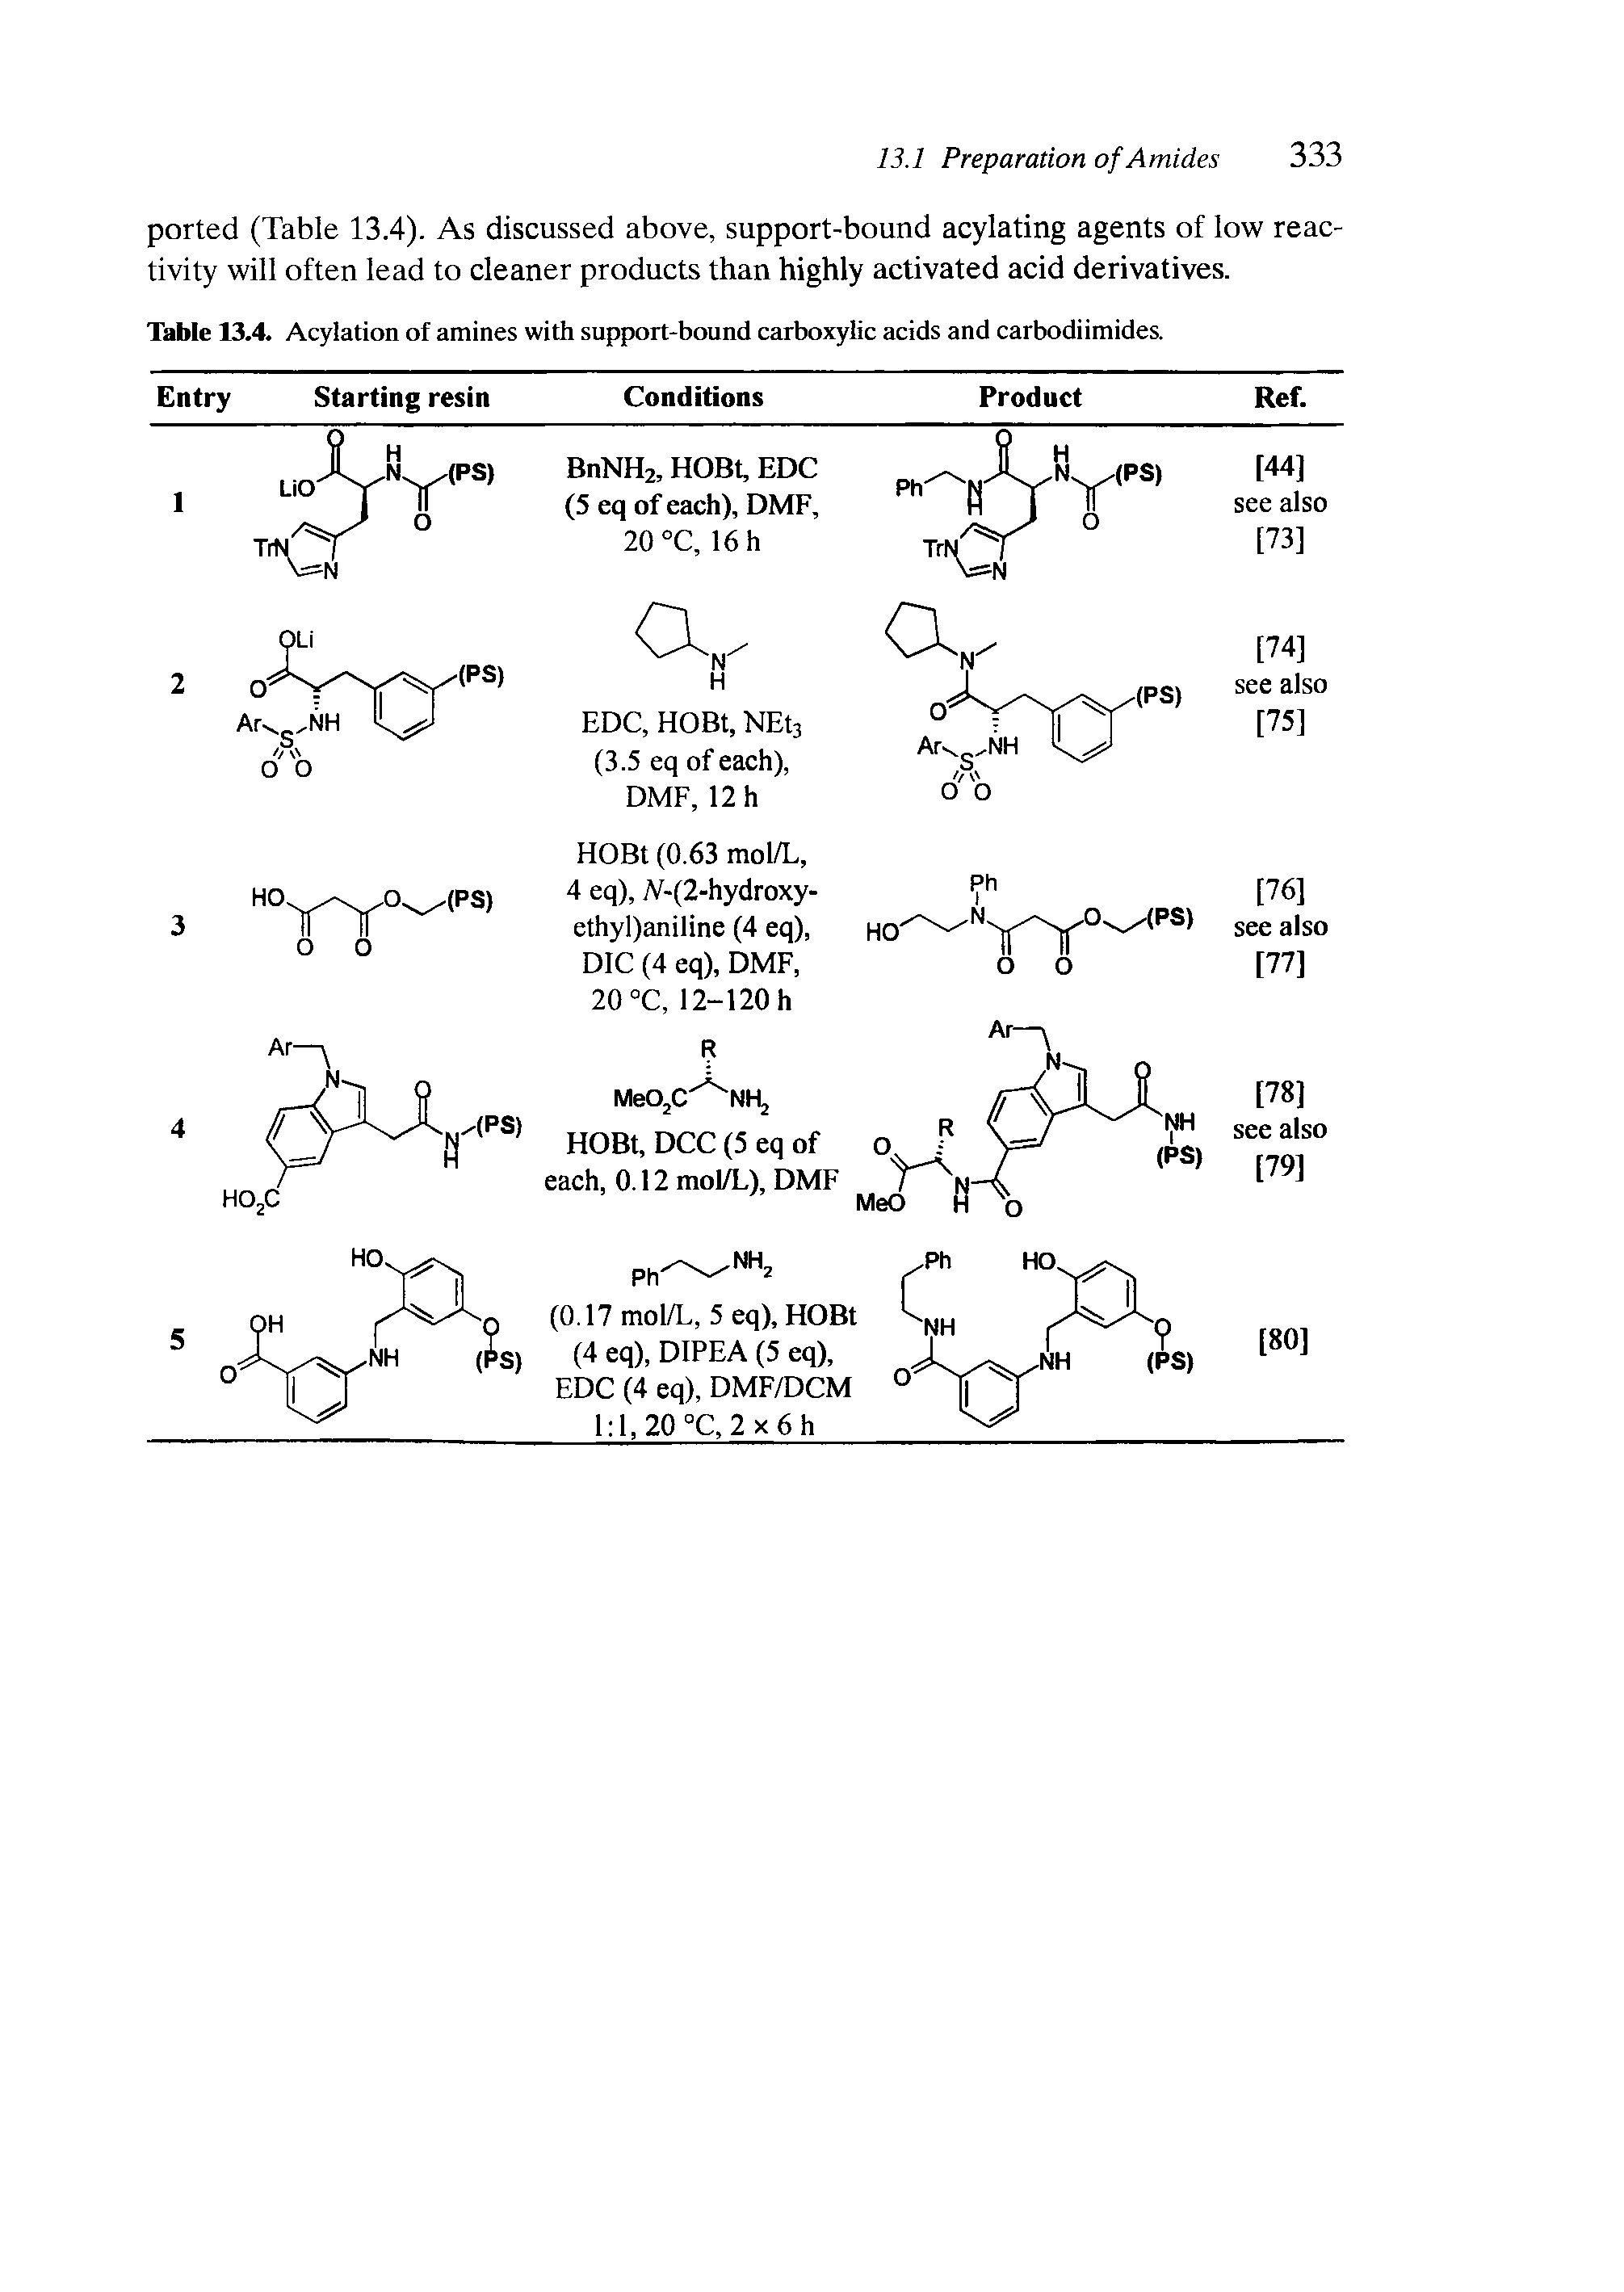 Table 13.4. Acylation of amines with support-bound carboxylic acids and carbodiimides.